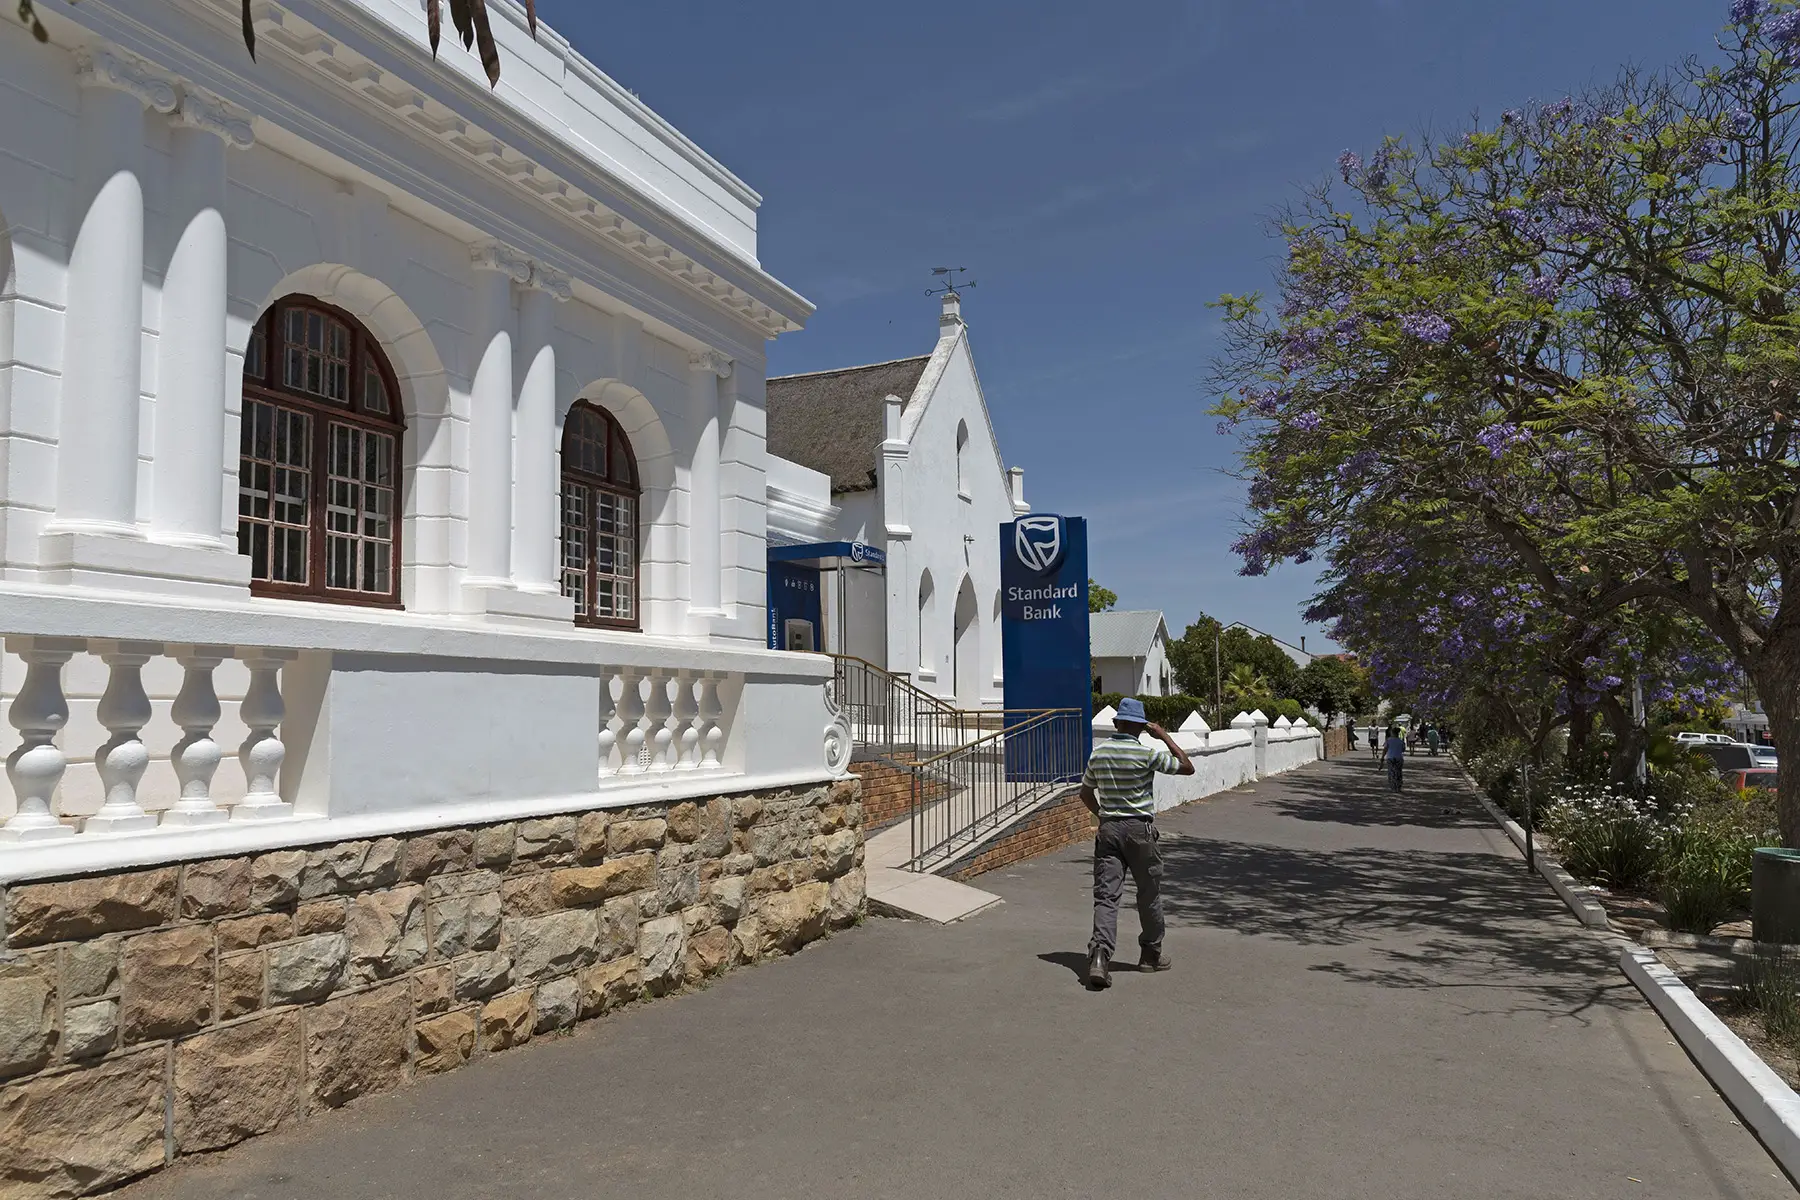 A bank entrance in Tulbagh, South Africa